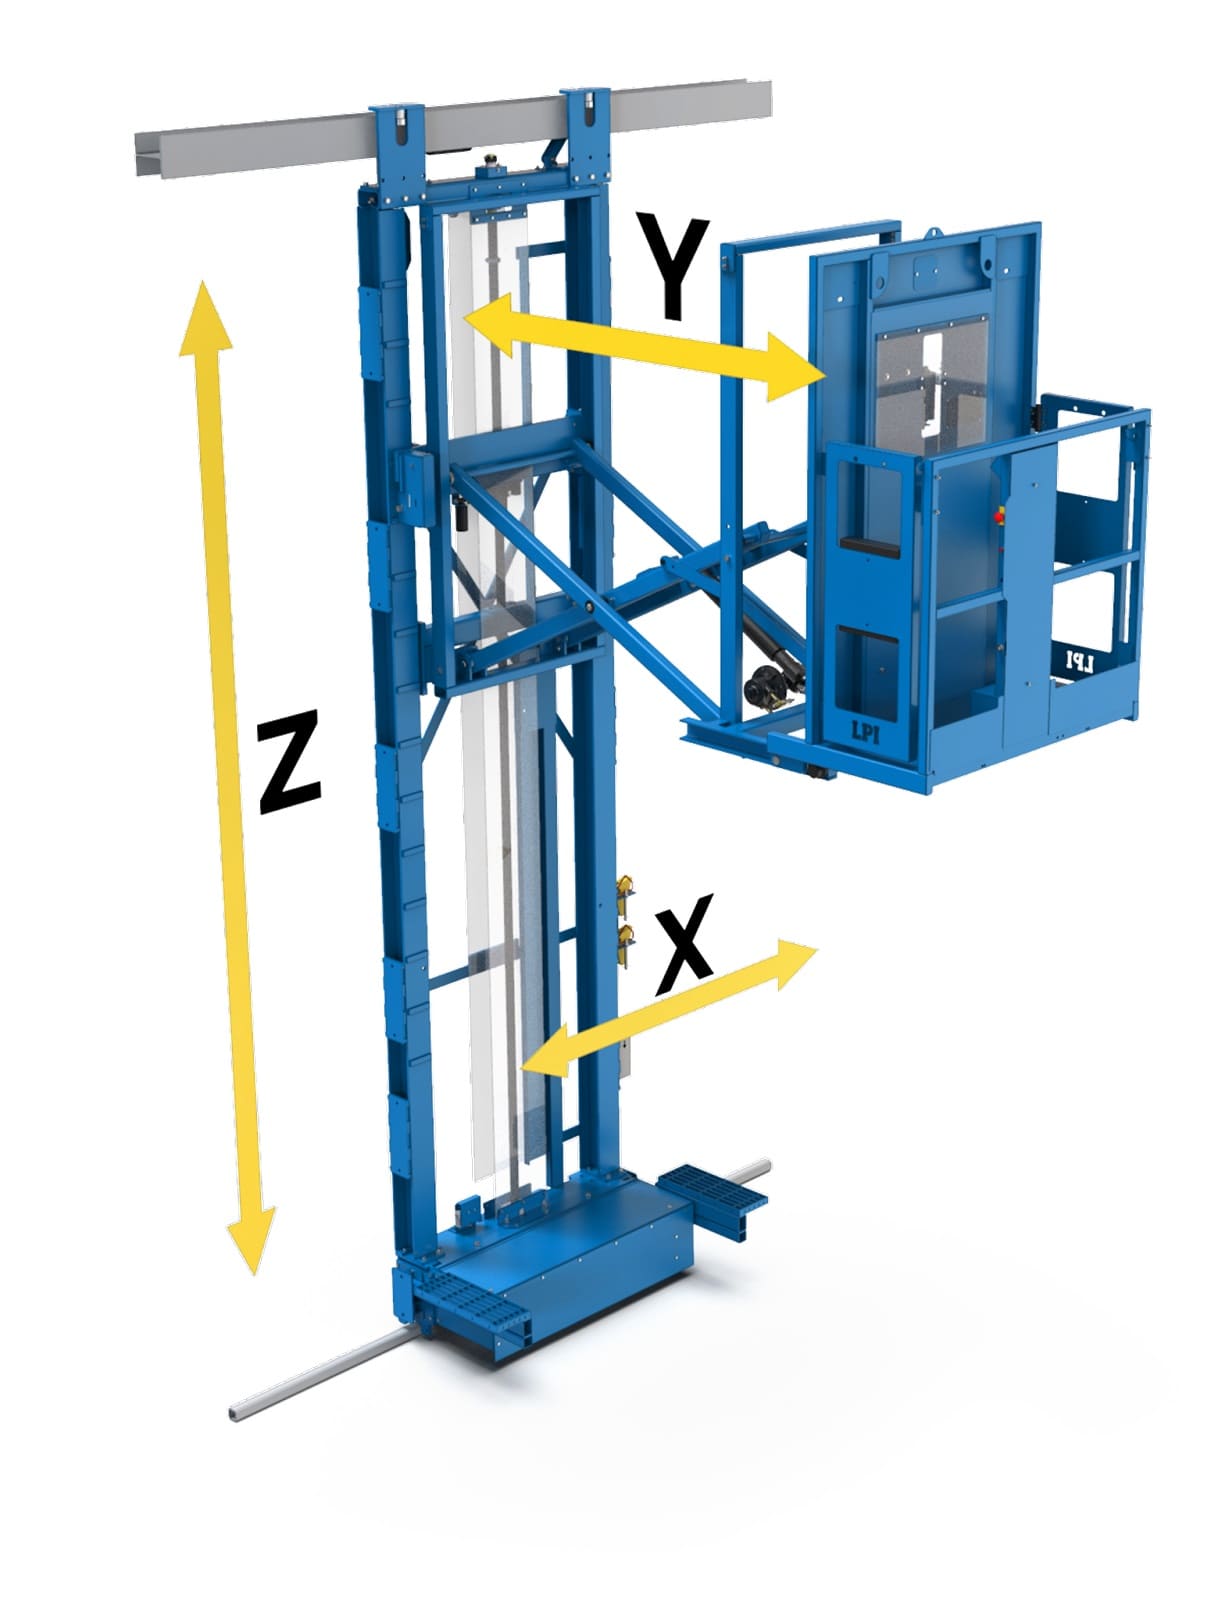 3 Axis Personnel Lift